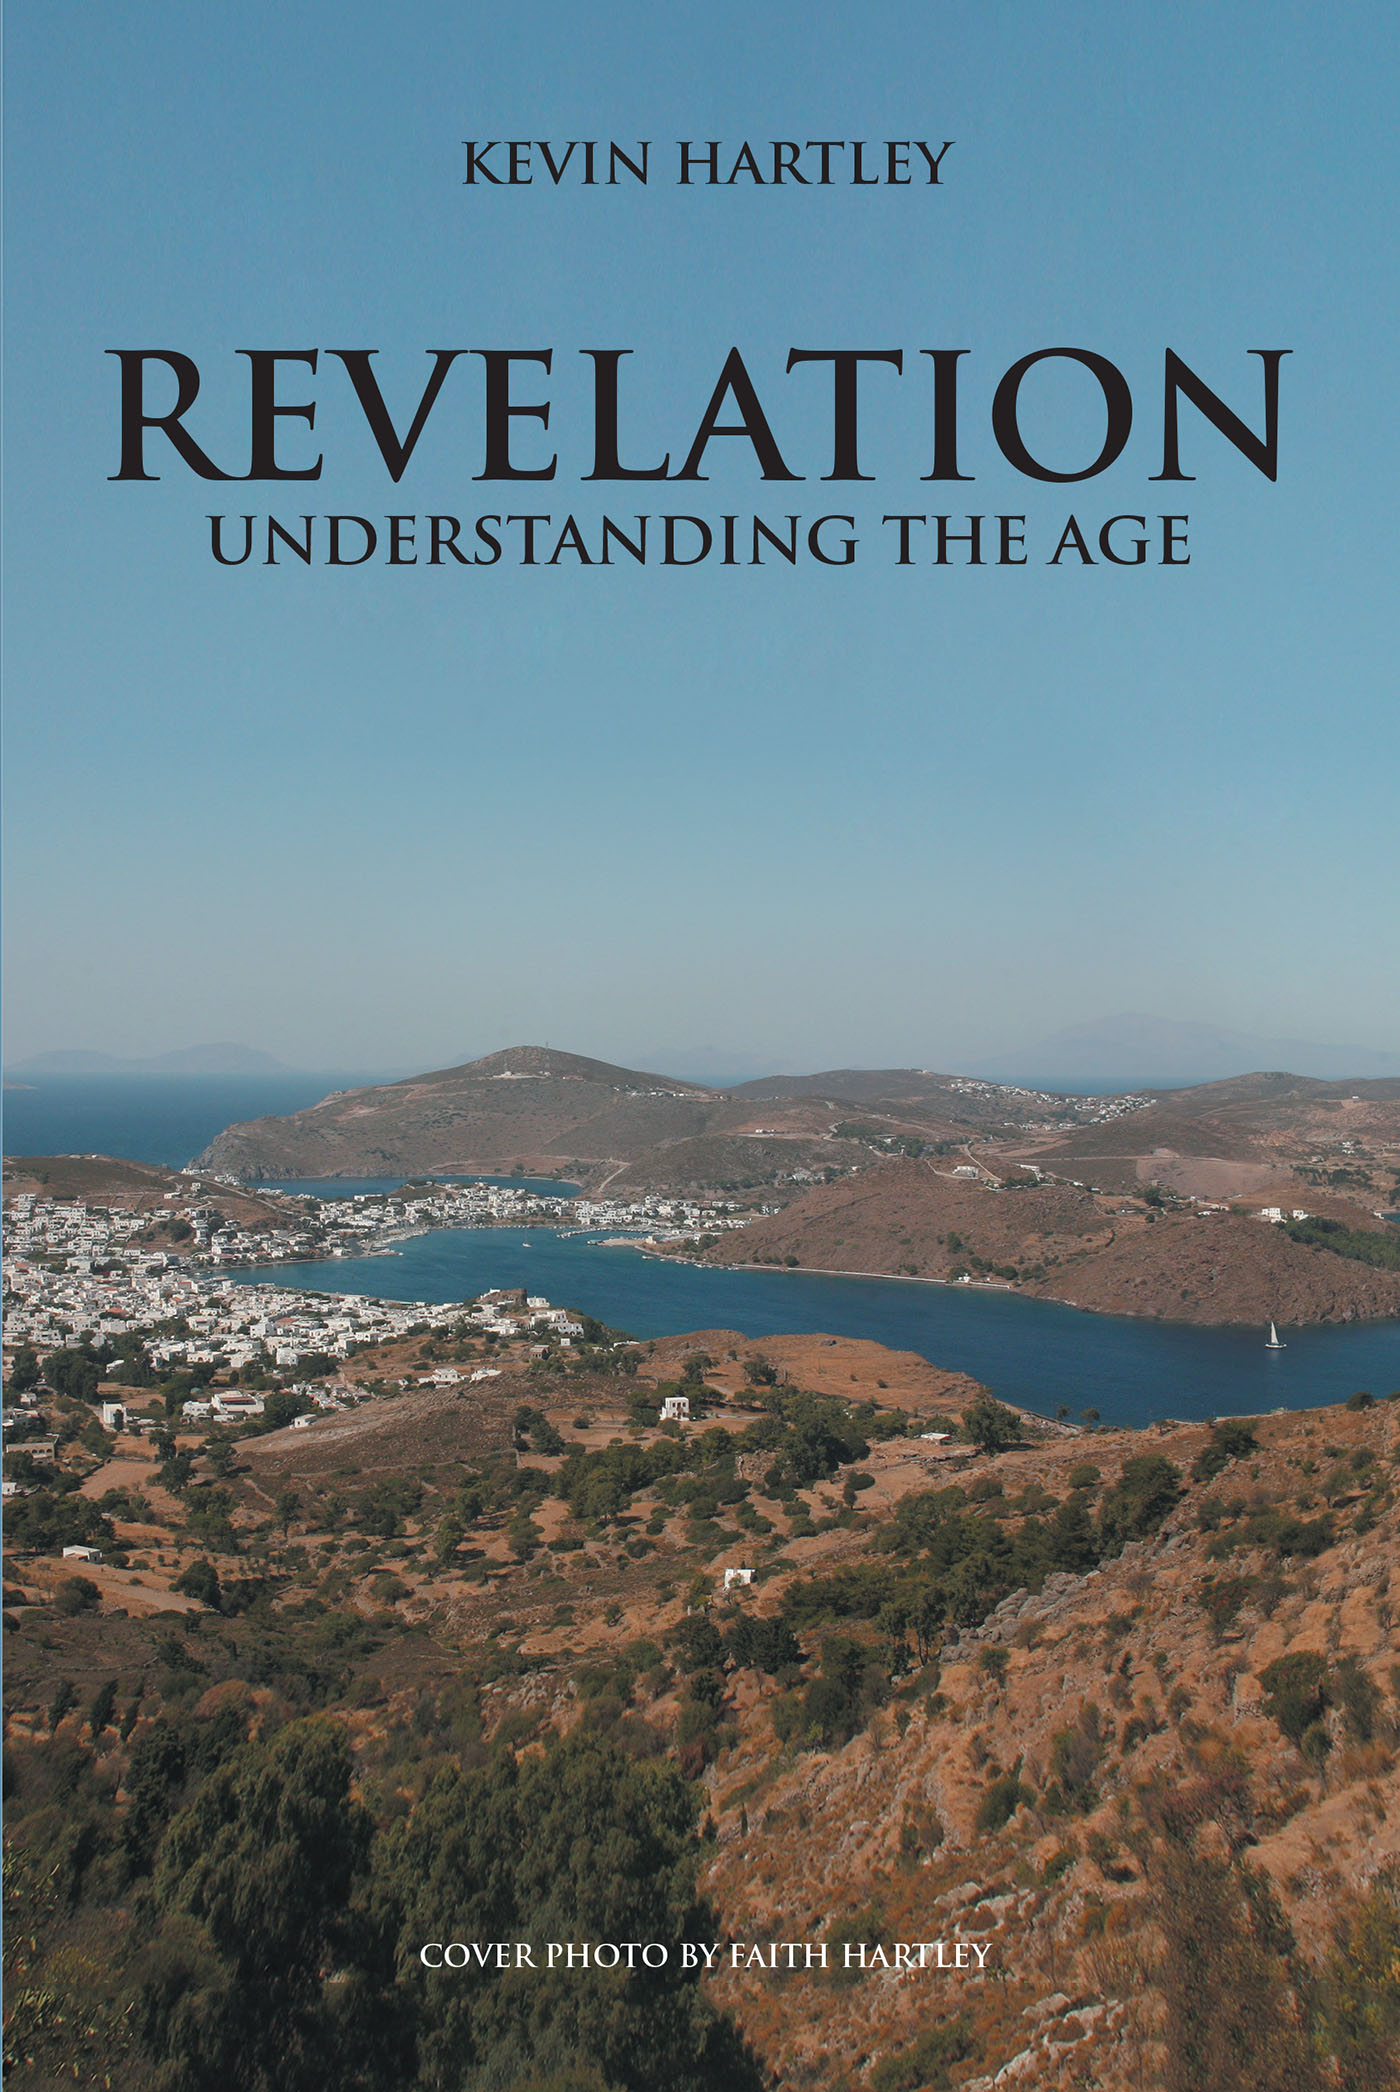 Author Kevin Hartley’s New Book, "REVELATION: Understanding the Age," Takes a Look at the New Testament's Final Book and the True Meaning Behind Its Text in a Modern Age